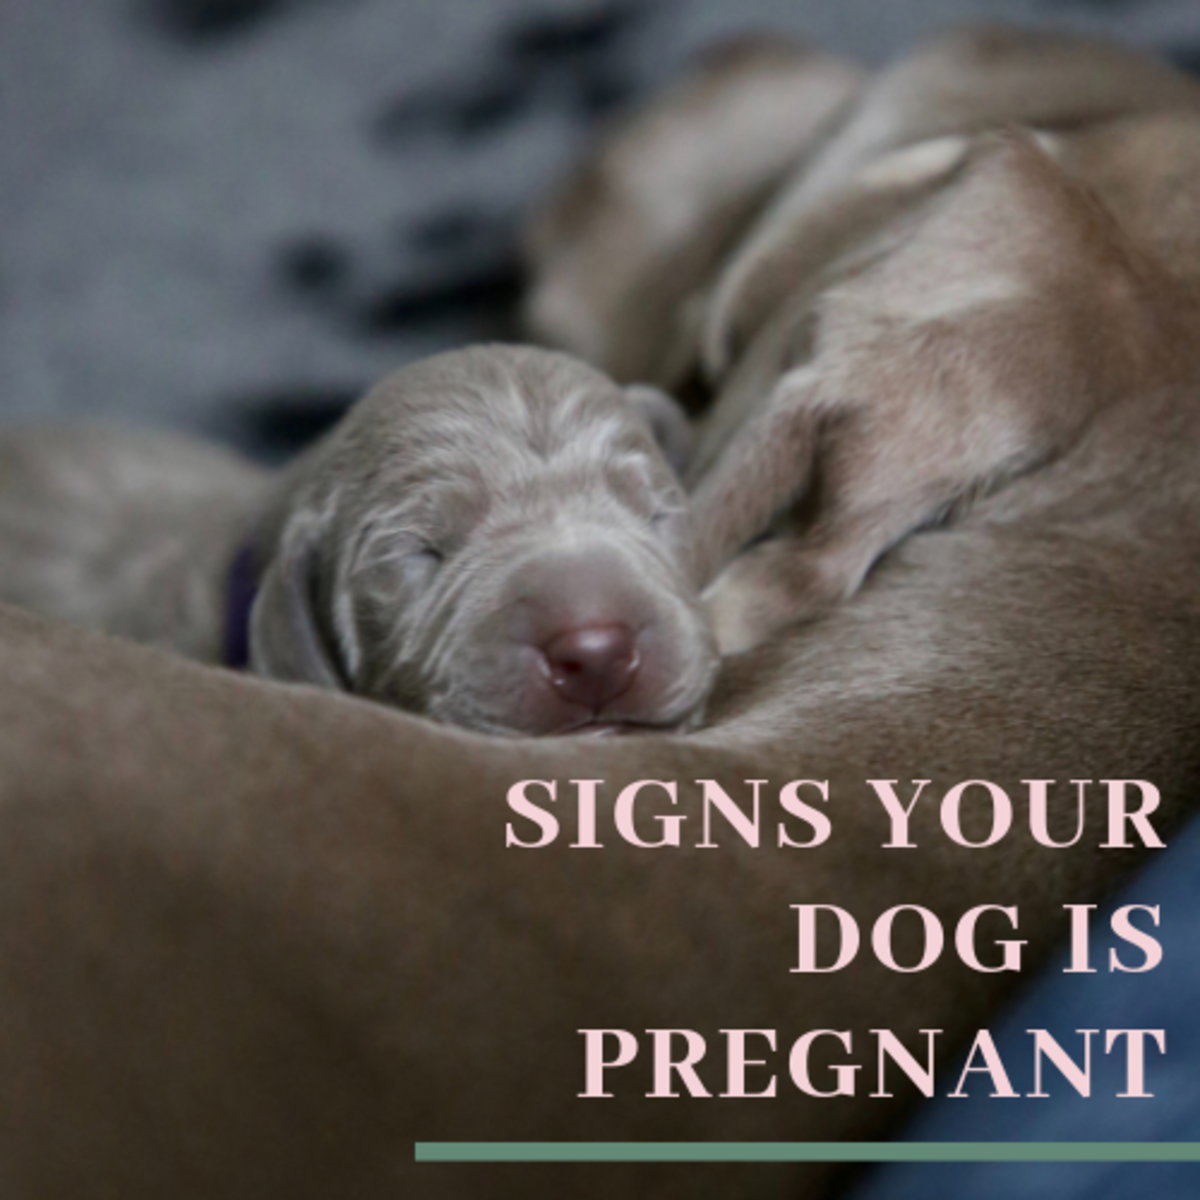 do dogs stop bleeding once pregnant